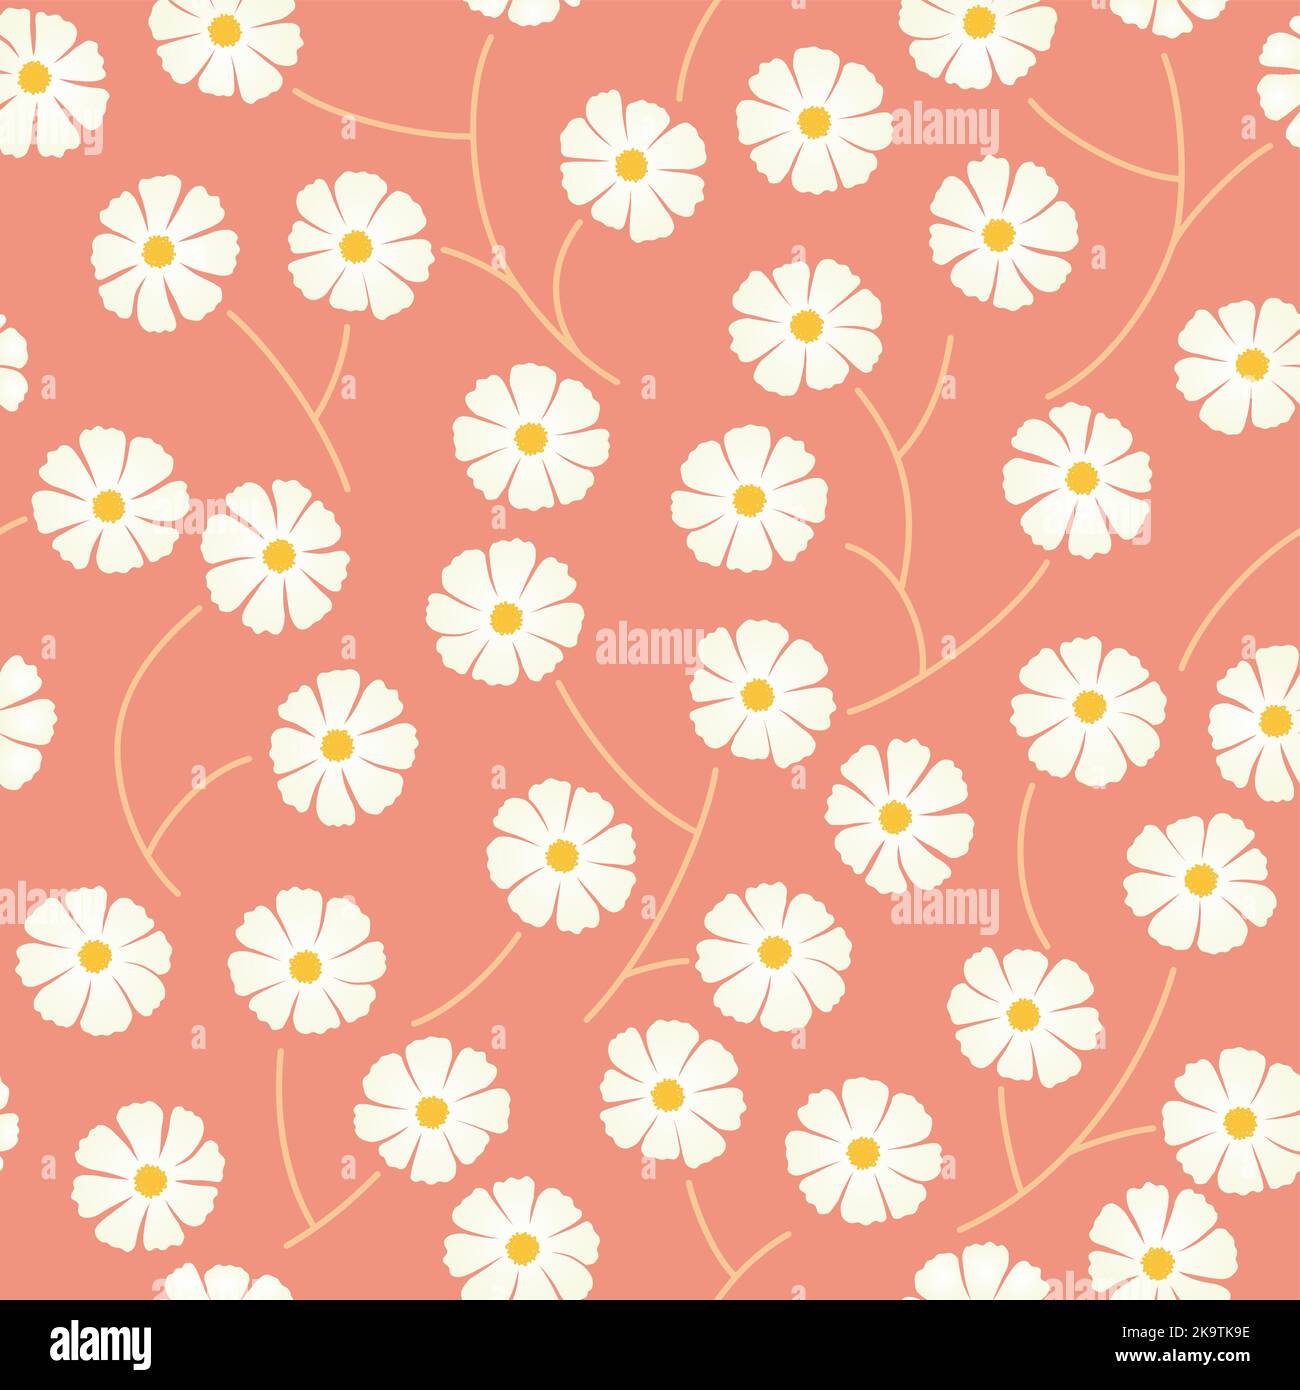 Pink orange flower Stock Vector Images - Page 2 - Alamy